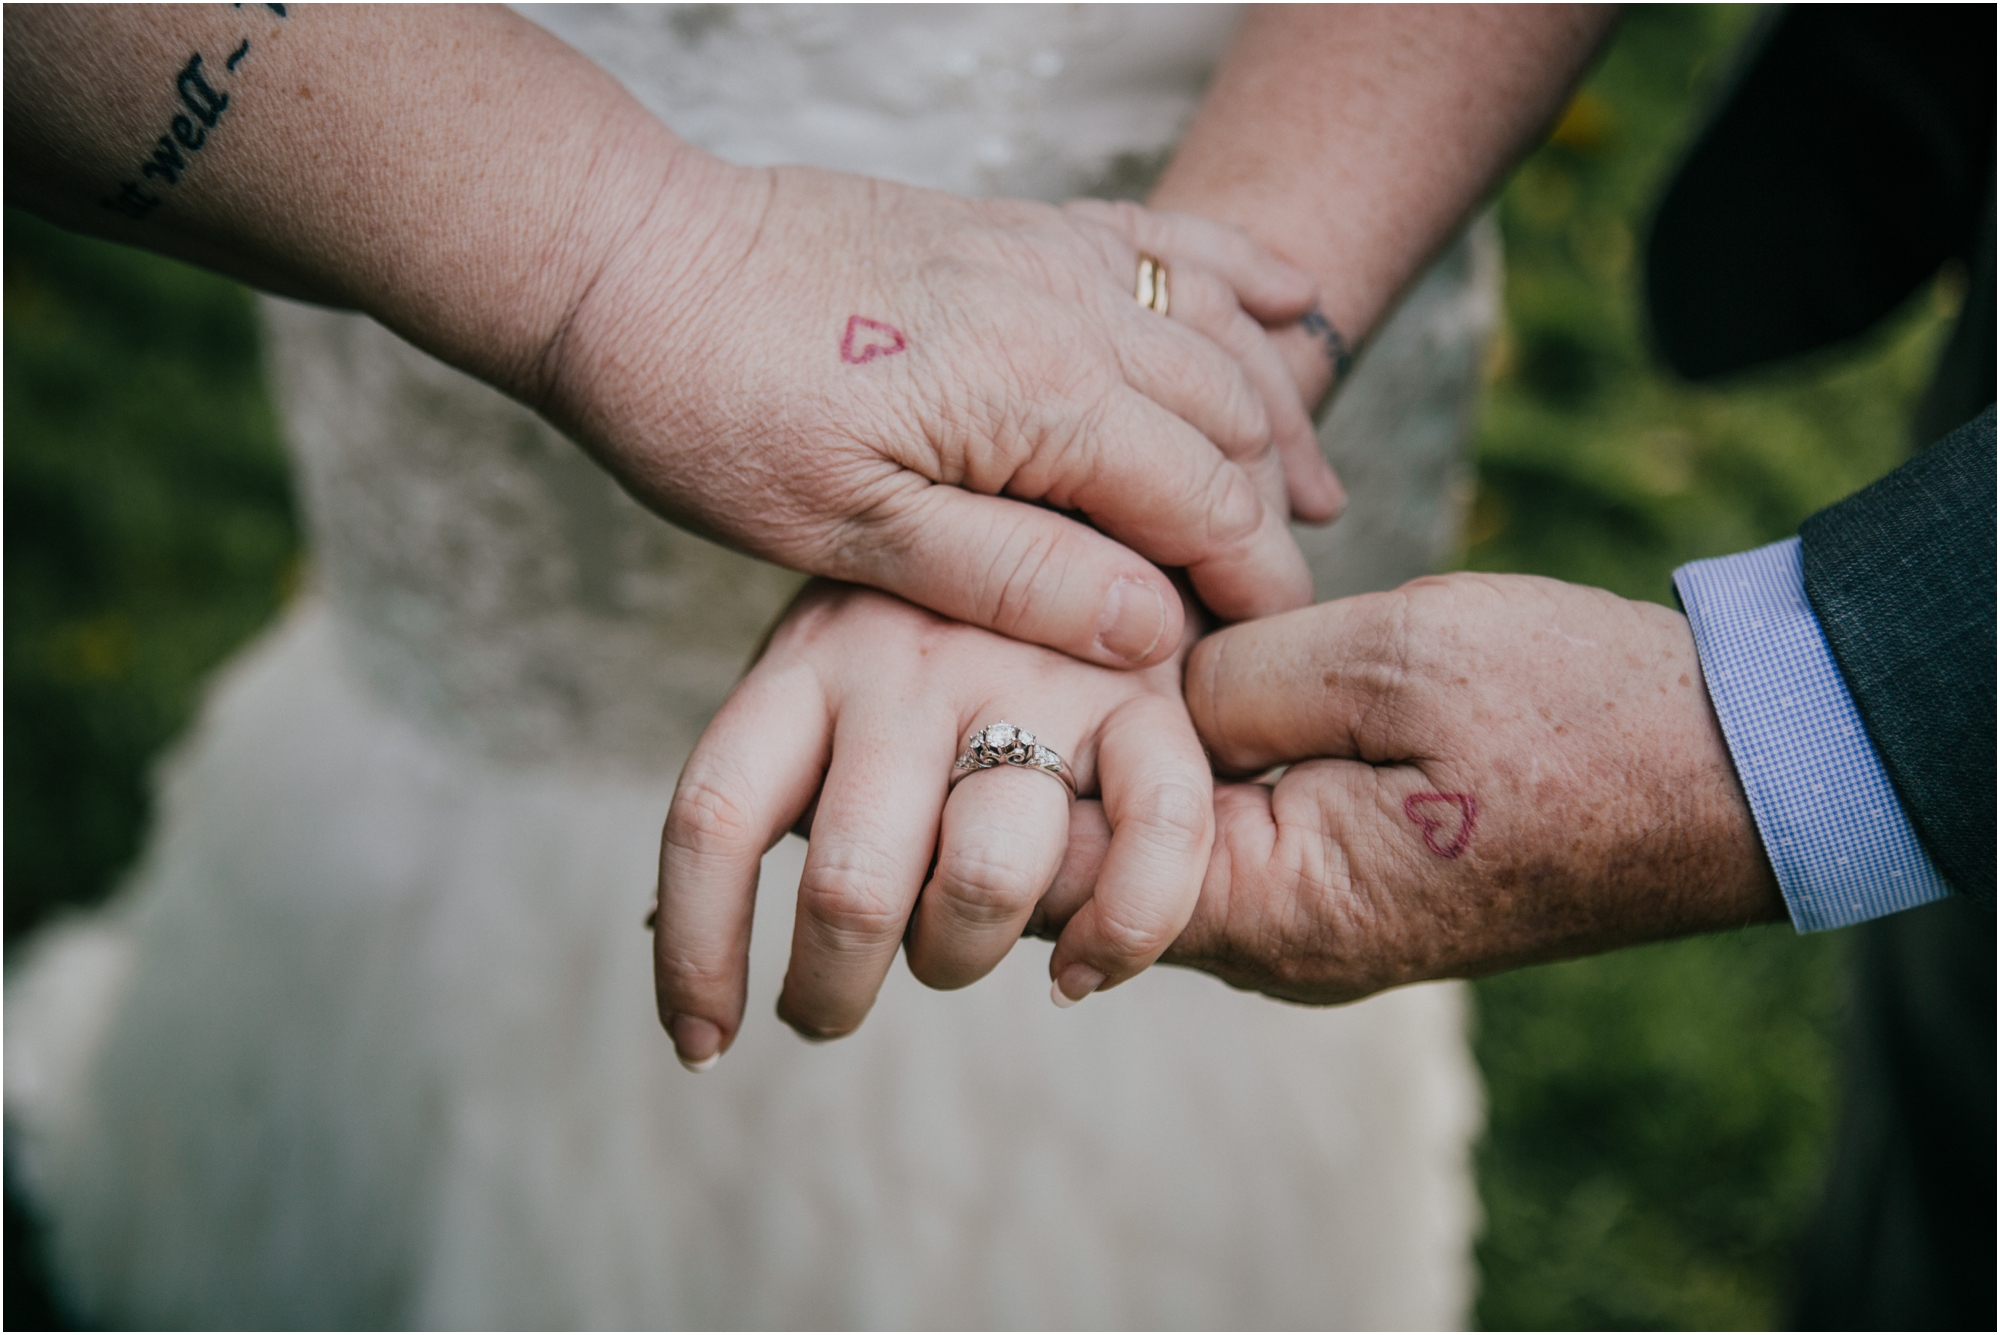  One of my favorite photos from the day! Bethany had drawn a little heart on her parent's hands one day, and they ended up getting it tattooed on!&nbsp; 